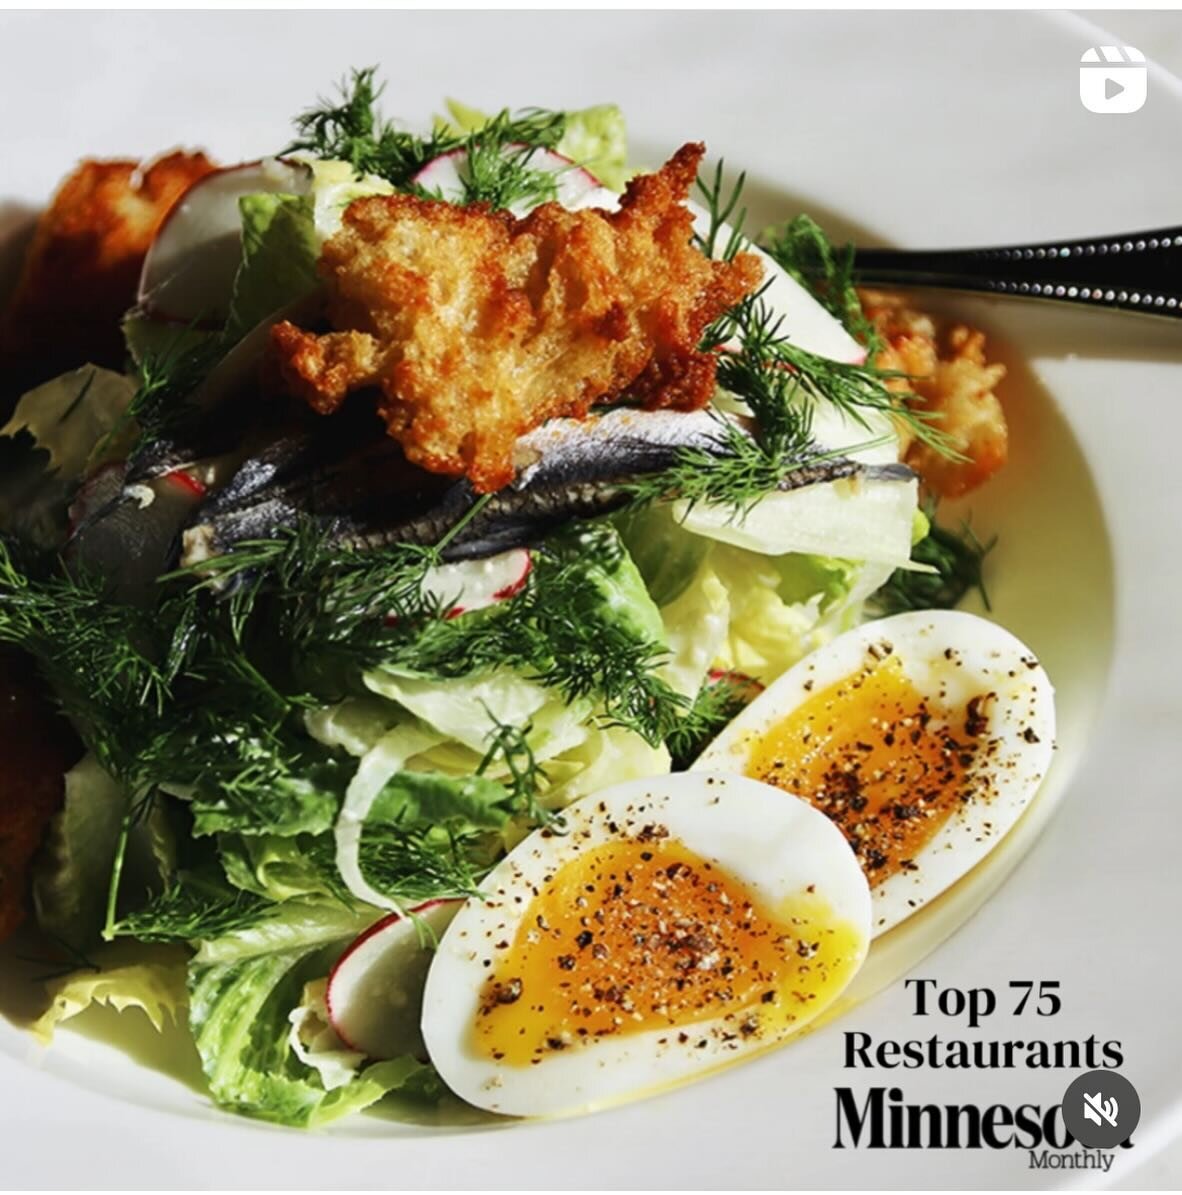 Fun to see my shot of the BLG Caesar in the @mnmomag Top 75 Restaurants story! Those jammy eggs 😍

Congrats to the always excellent Bar la Grassa!

#foodphotographer #restaurantphotographer #barlagrassa #minneapolisphotographer #bestof #earthgirlsho